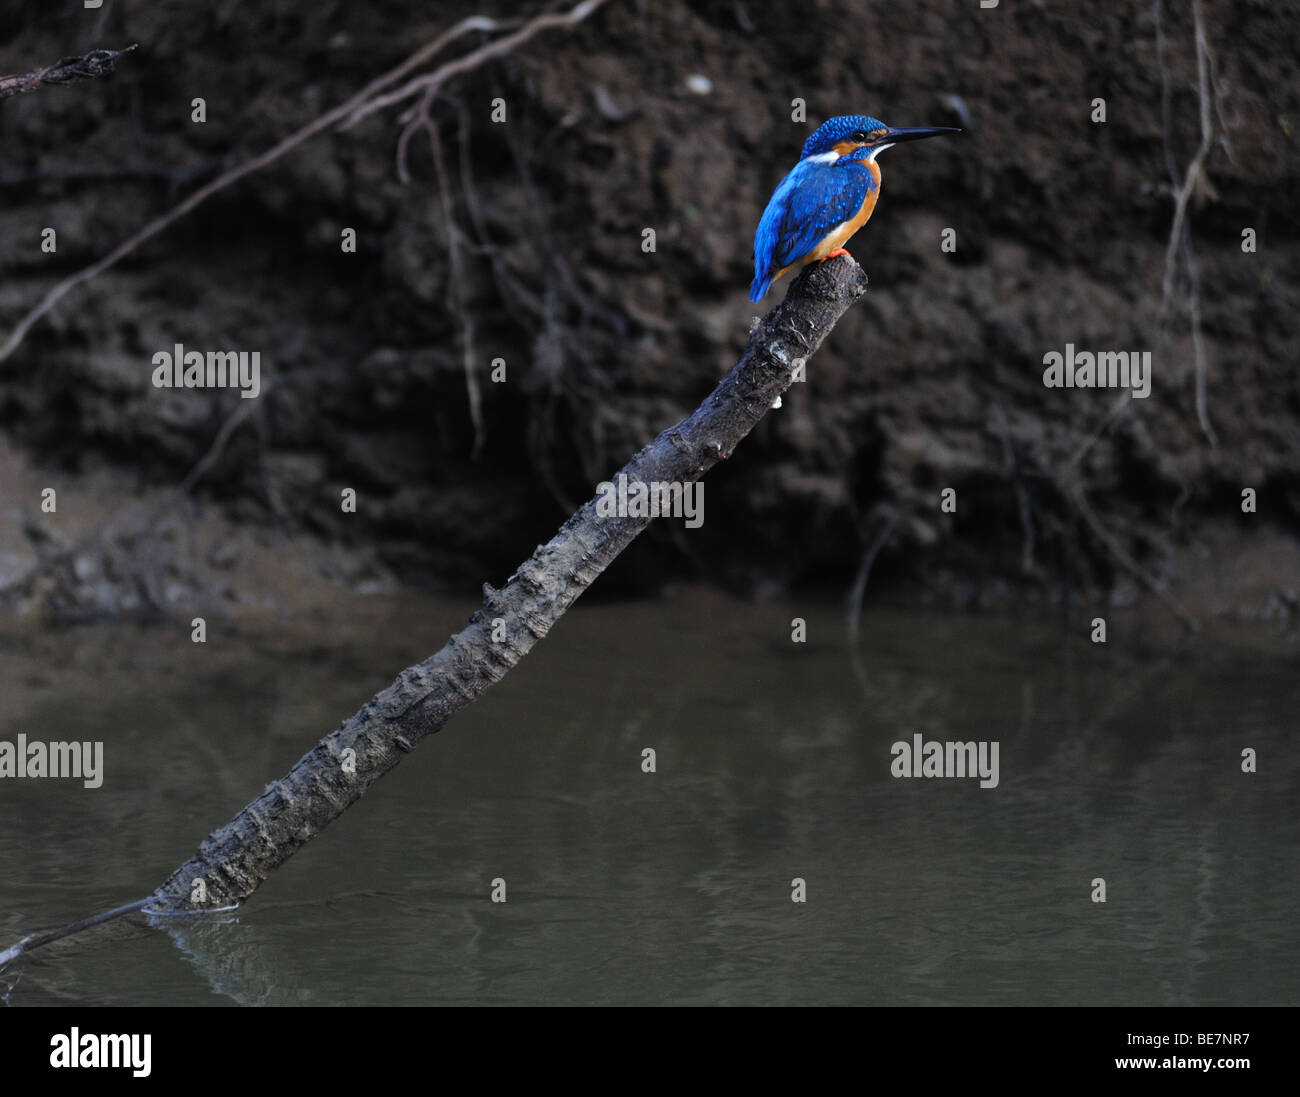 King fisher sitting on branch waiting for prey Stock Photo